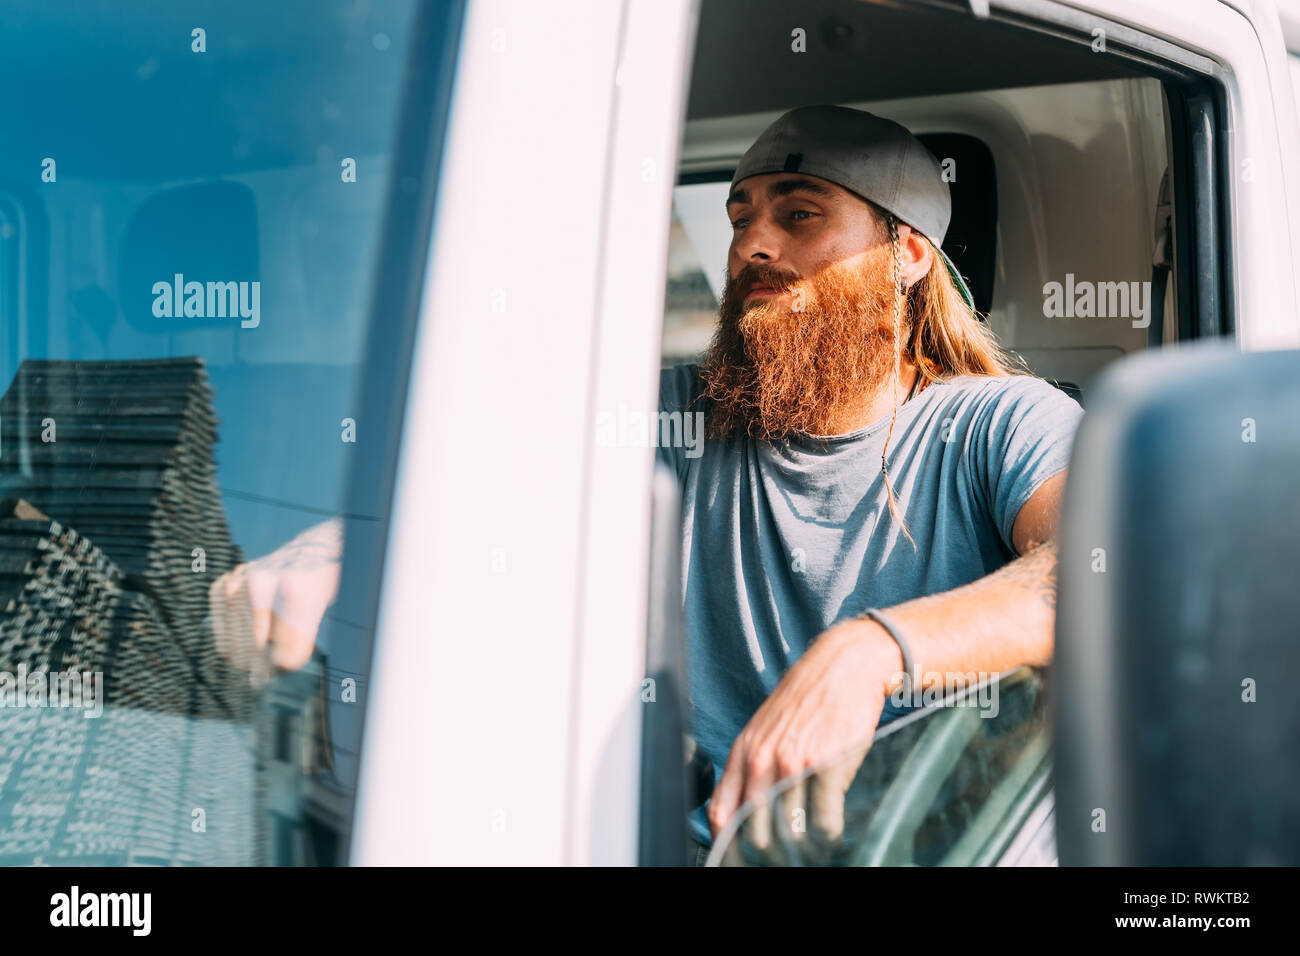 Man in commercial vehicle in industrial yard Stock Photo